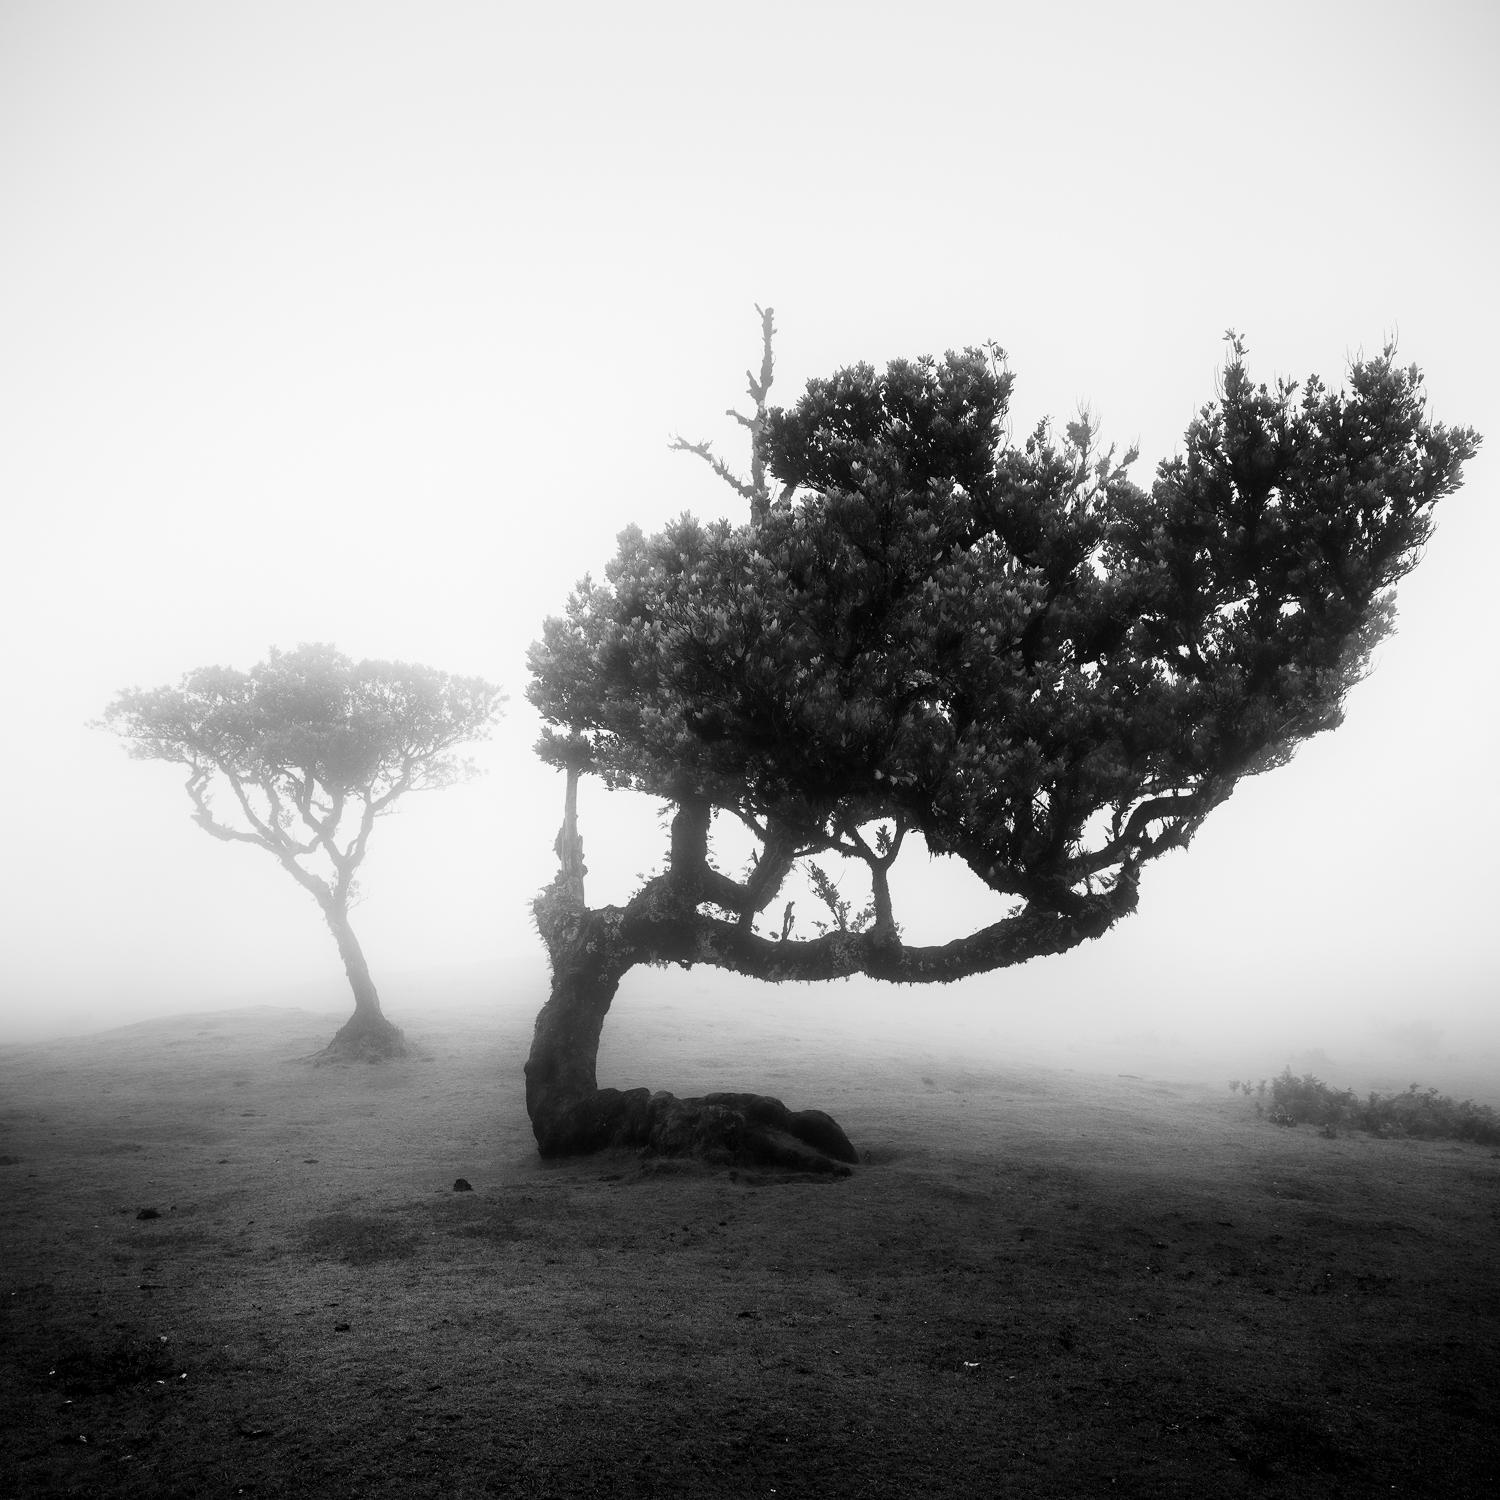  Ancient Laurel Cloud Forest, black and white art photography, landscape, framed - Photograph by Gerald Berghammer